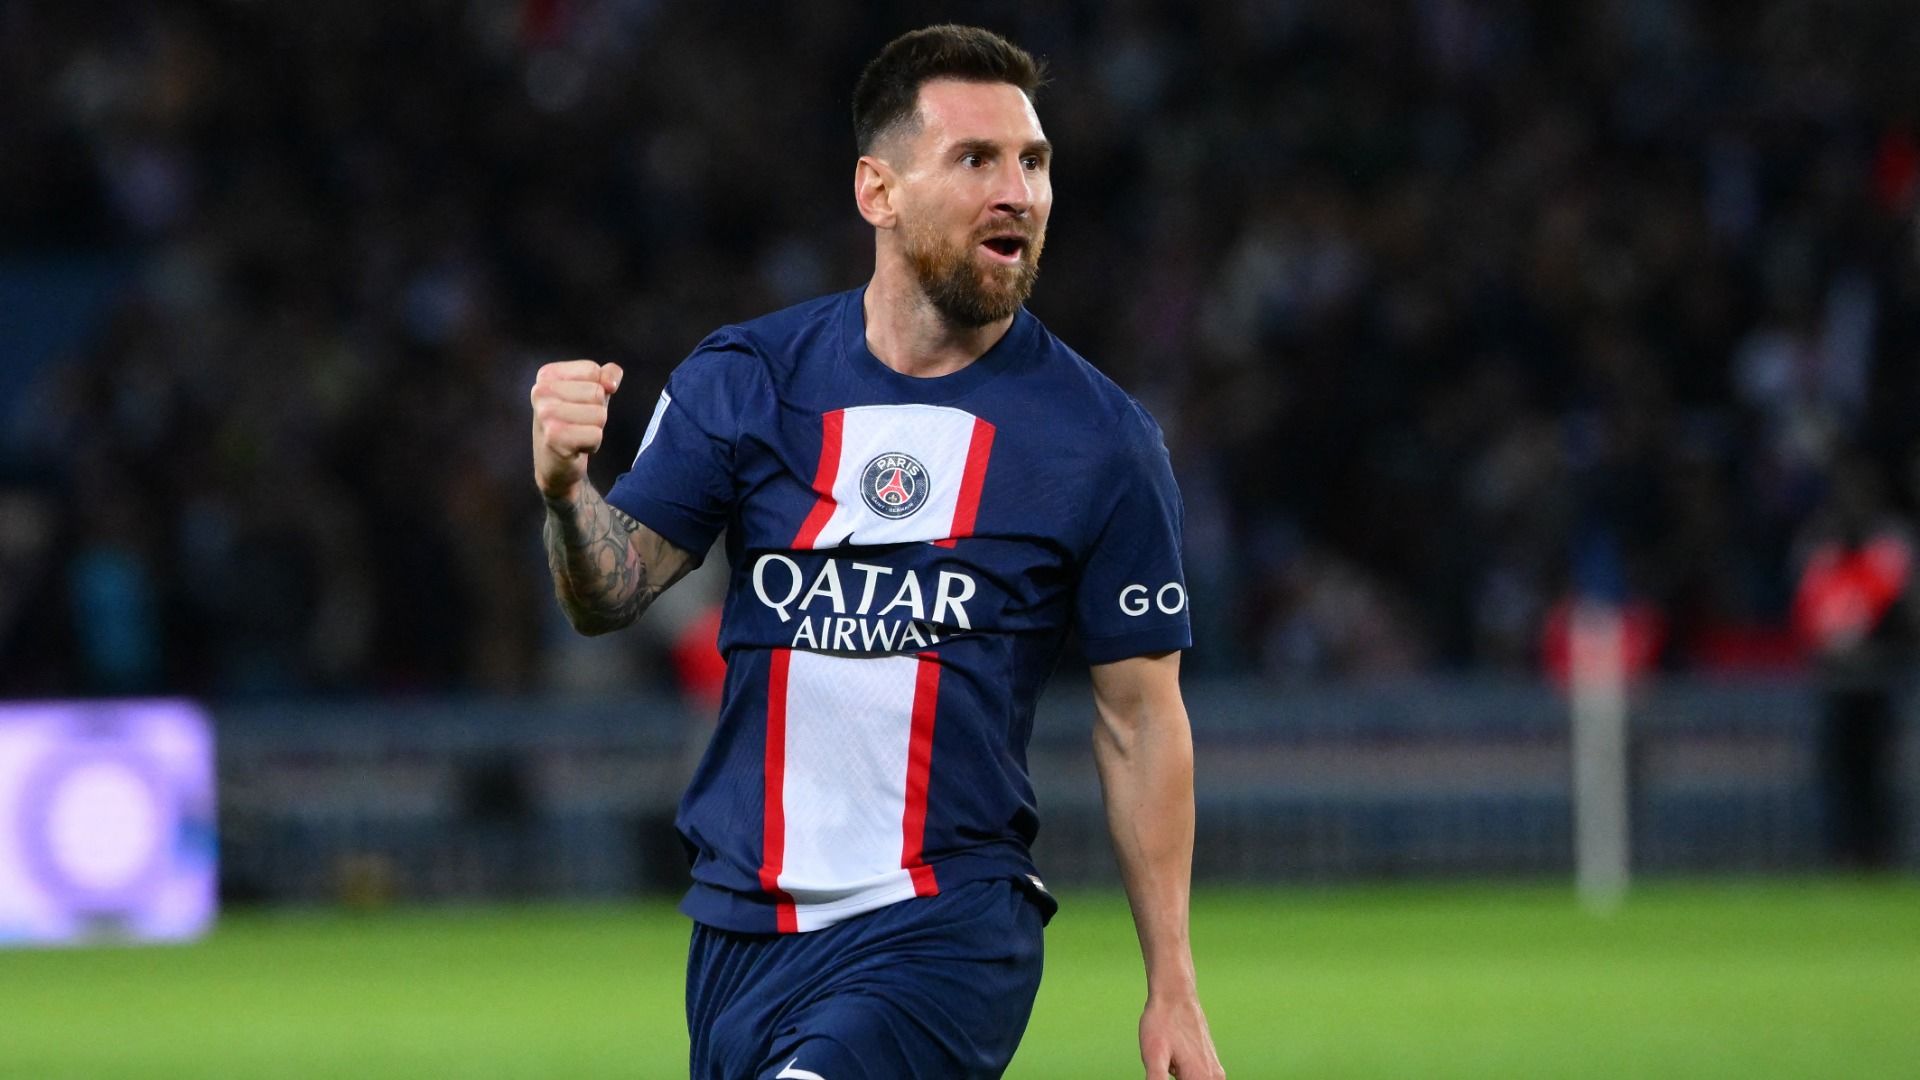 Insider Romano: Messi is not in talks with other clubs